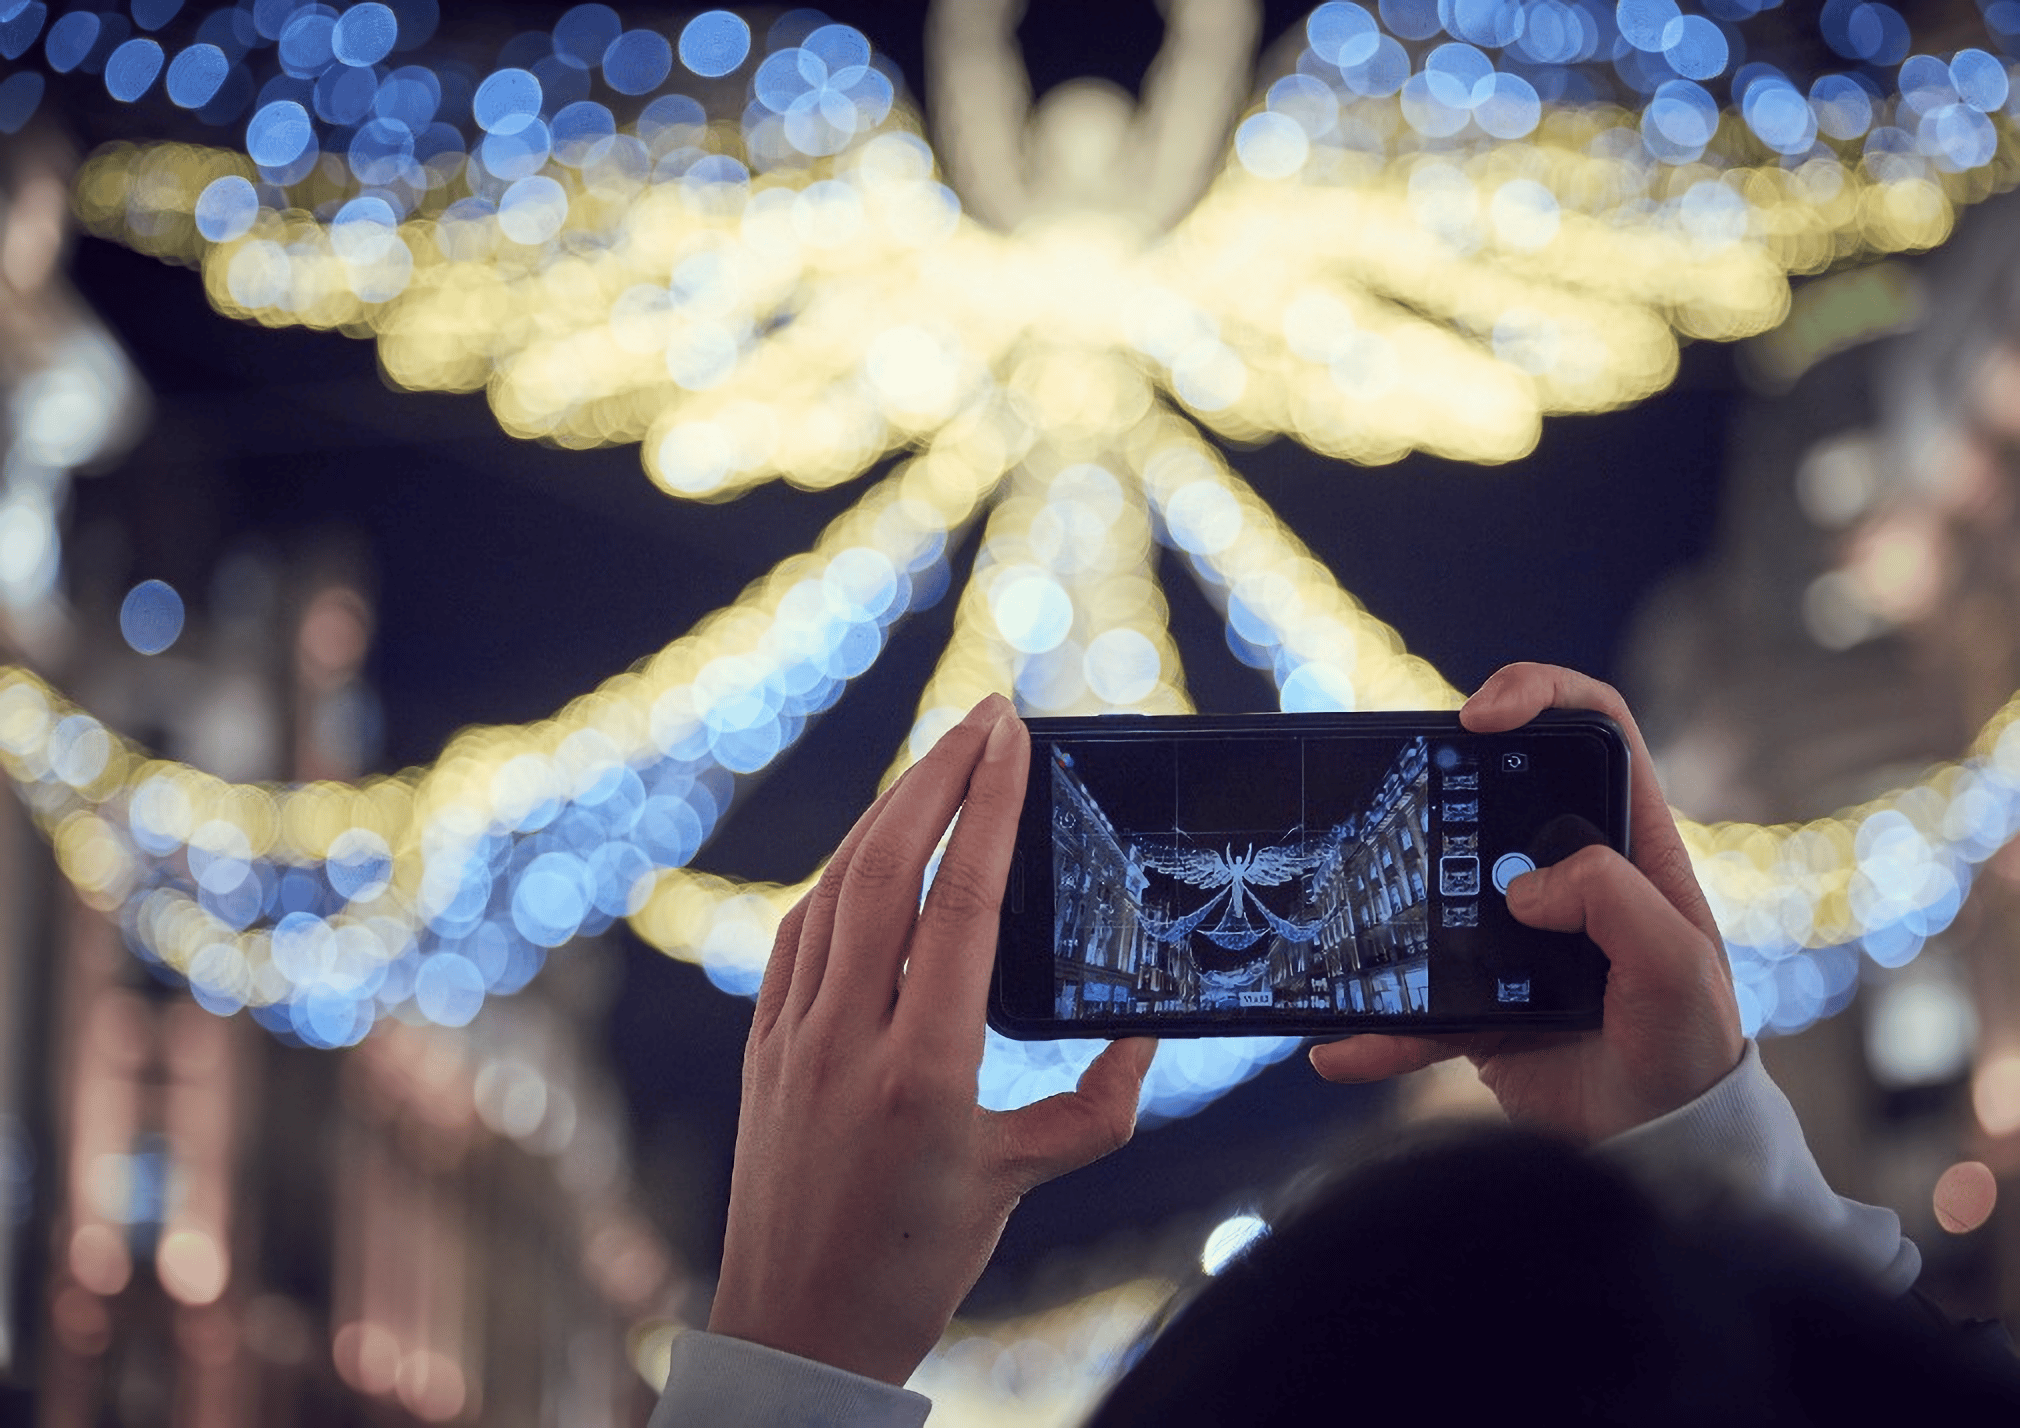 Someone photographing the regent street christmas lights with their iphone